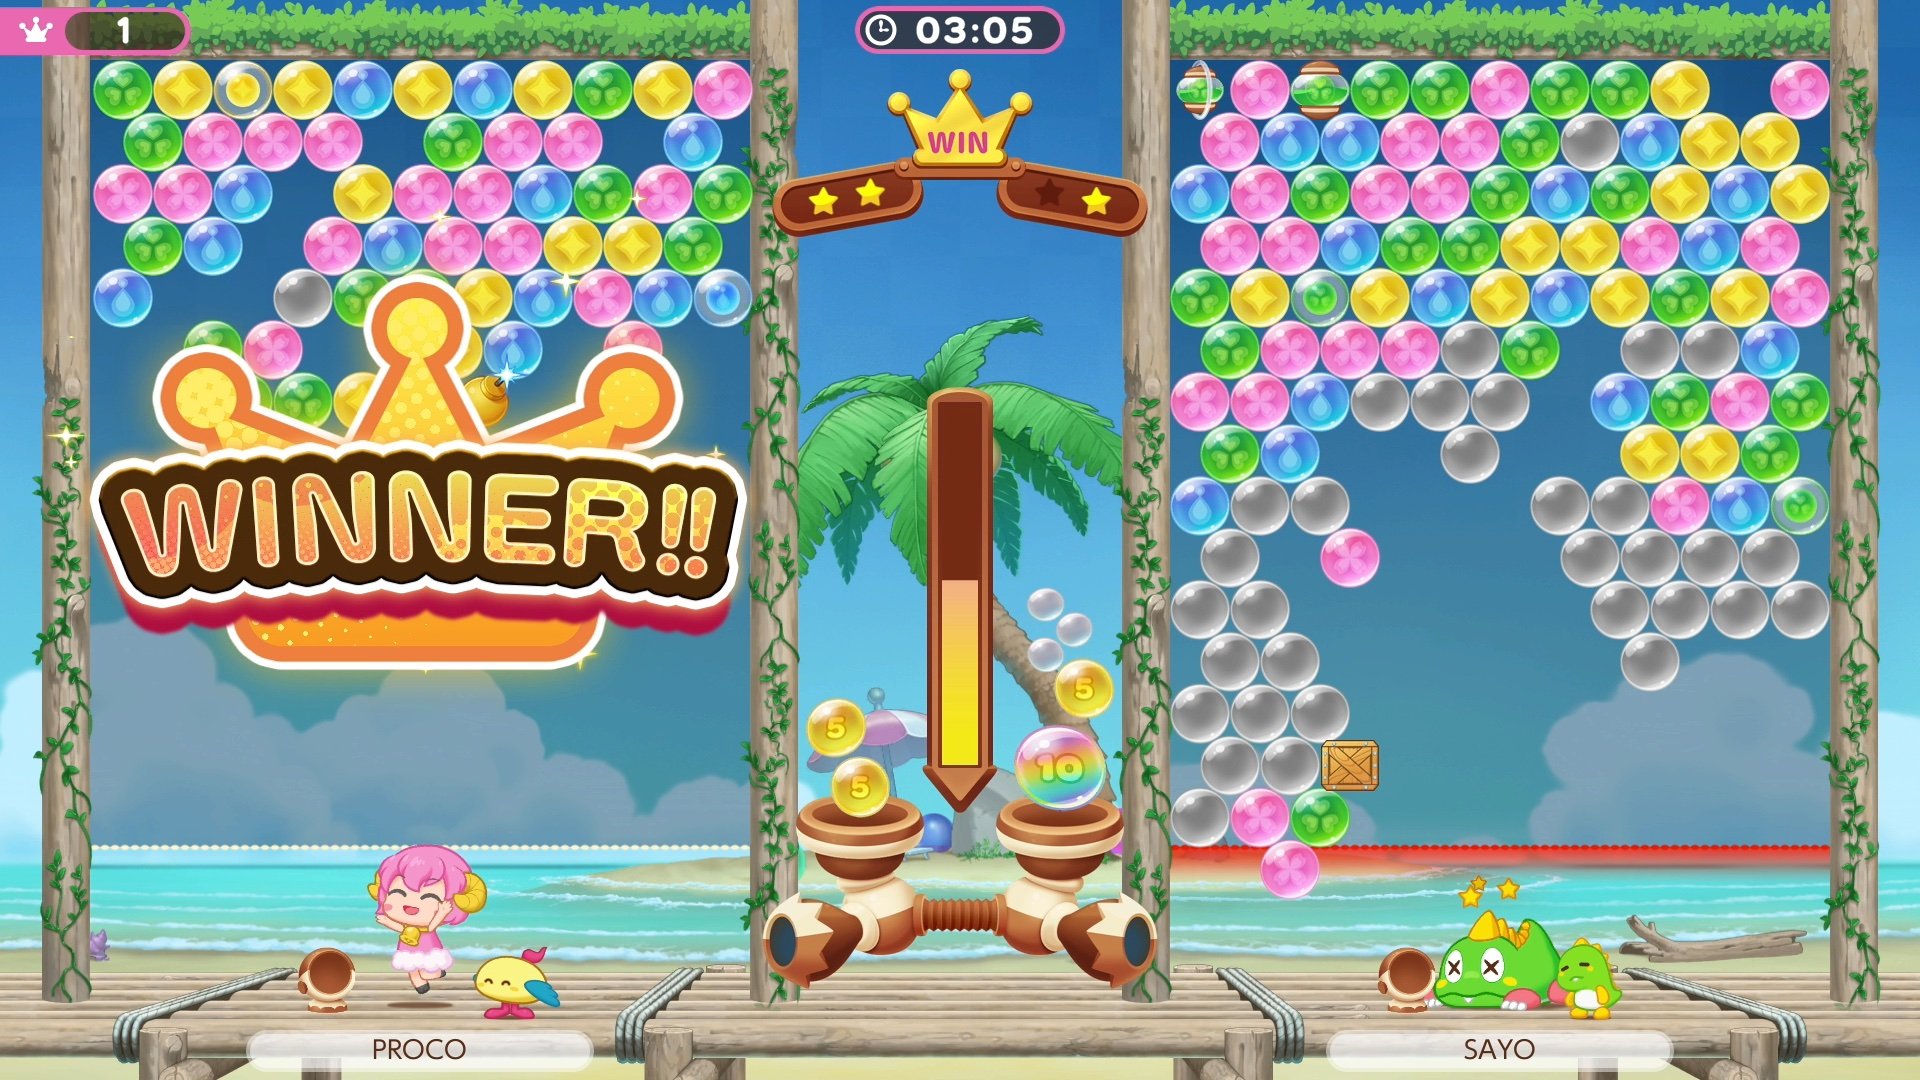 Puzzle Bobble Everybubble! launches May 23